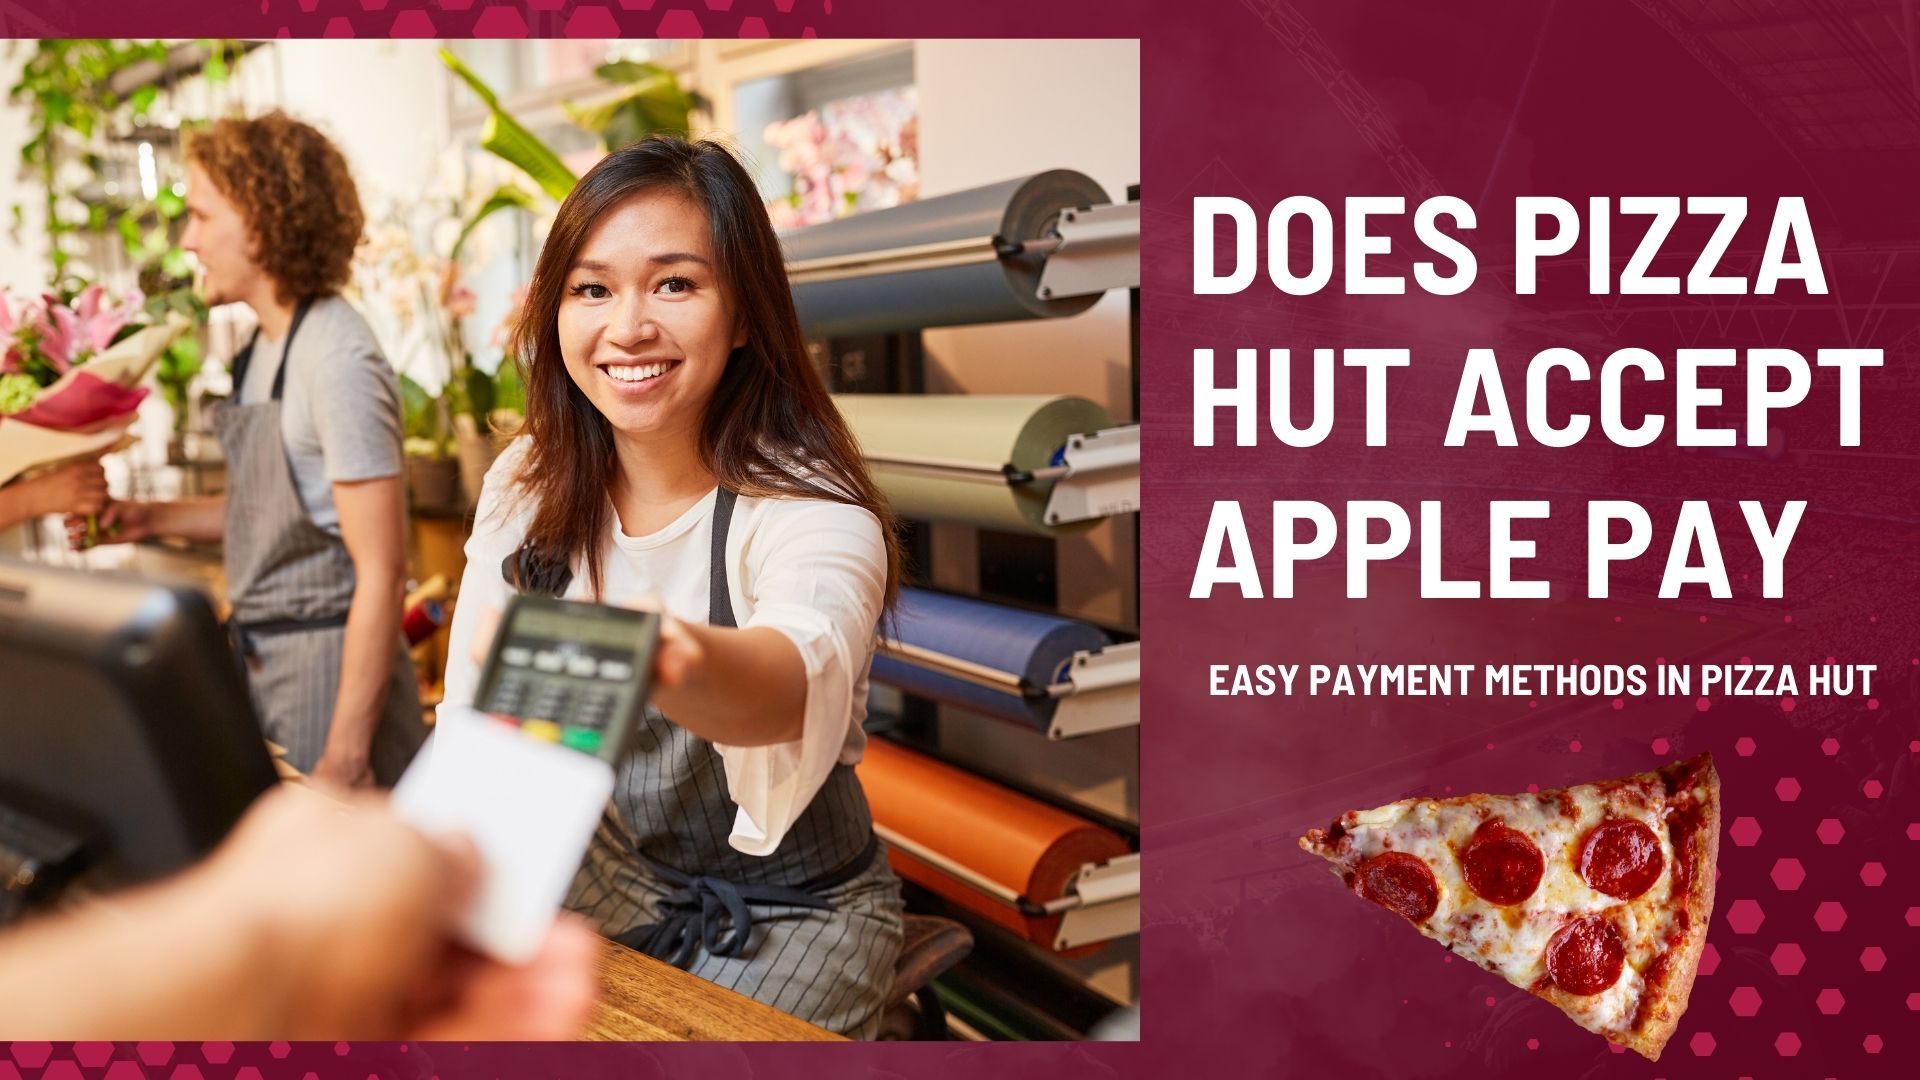 Does Pizza Hut take Apple Pay?